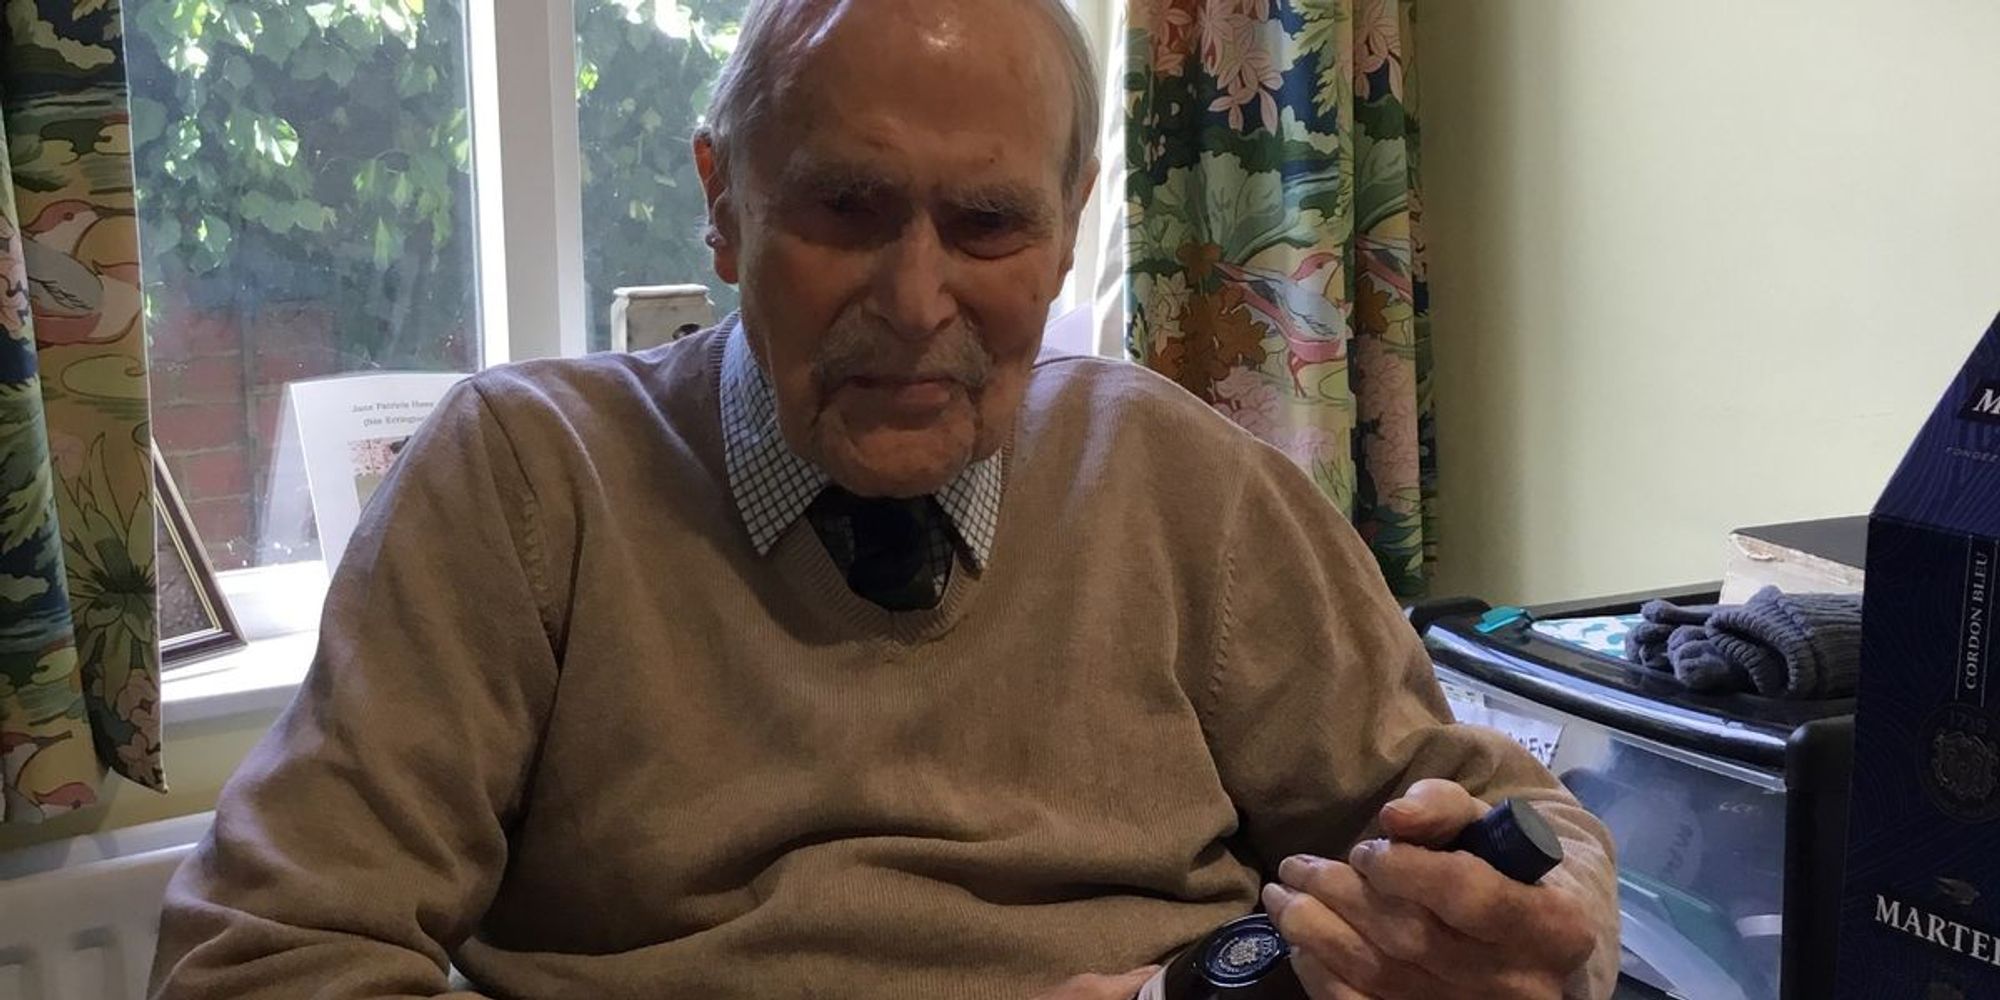 Veteran who fought in Dunkirk rearguard defense celebrates his 104th birthday